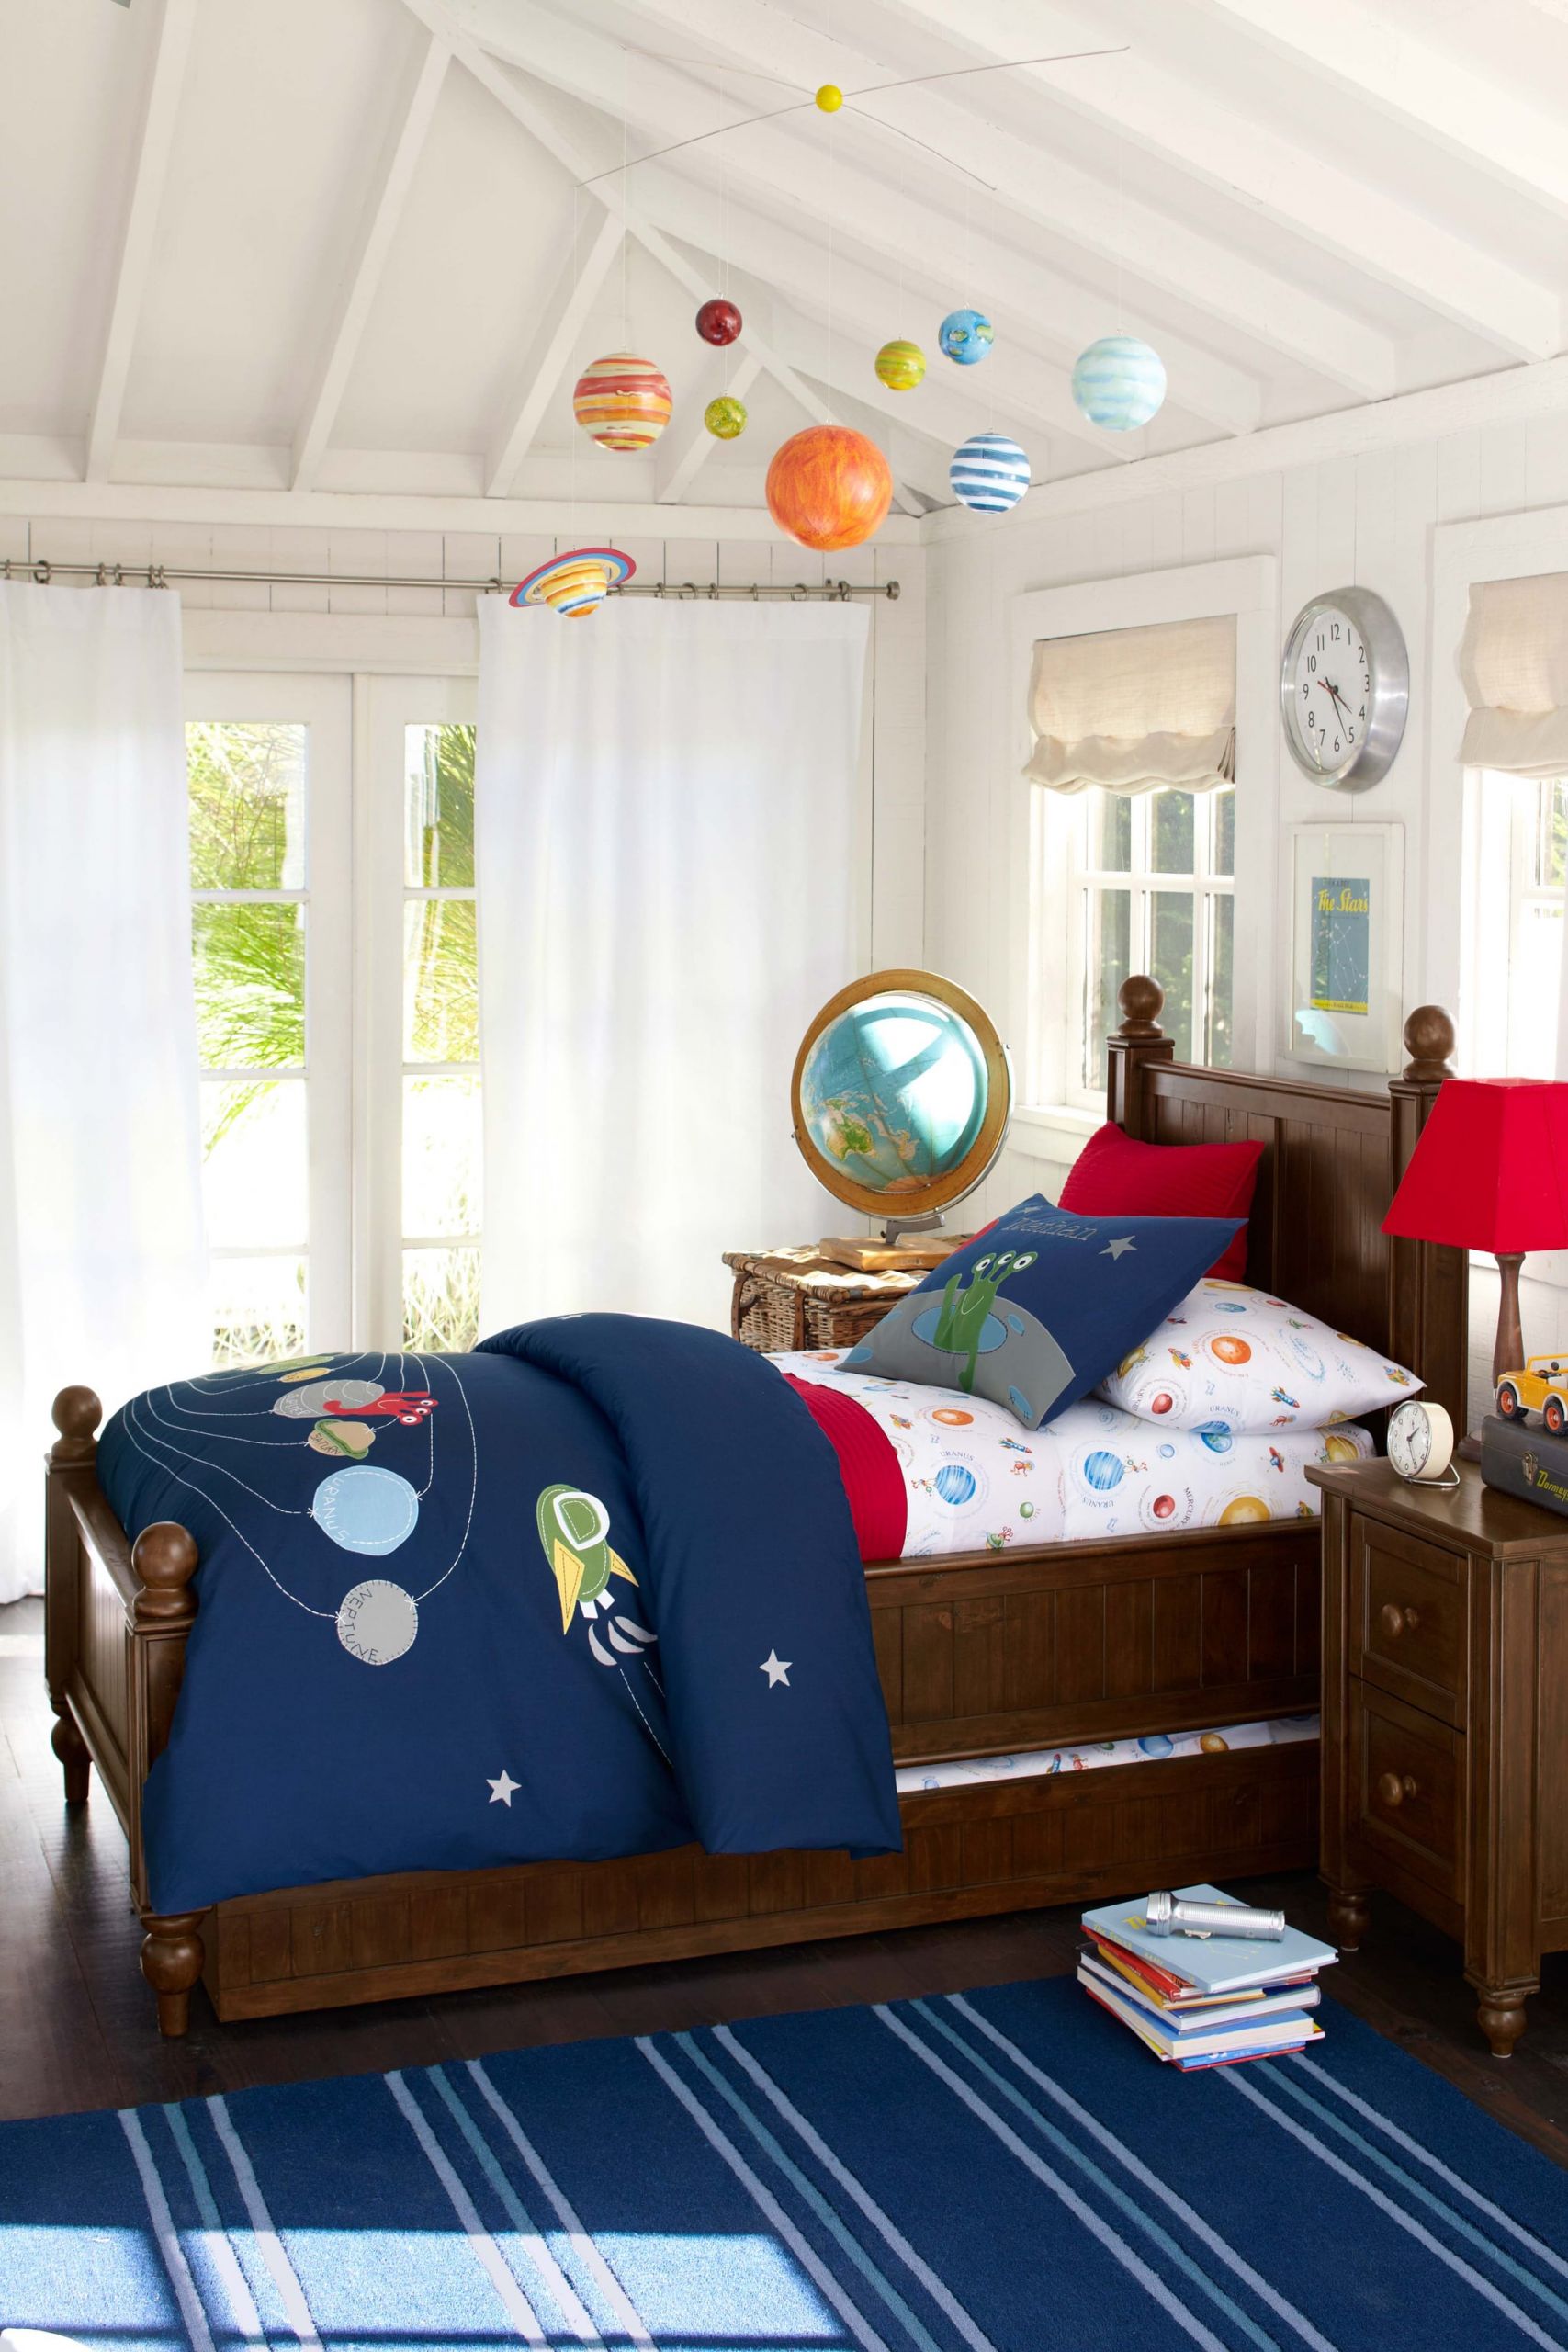 Solar System For Kids Room
 Your big boy s room may already be the final frontier when